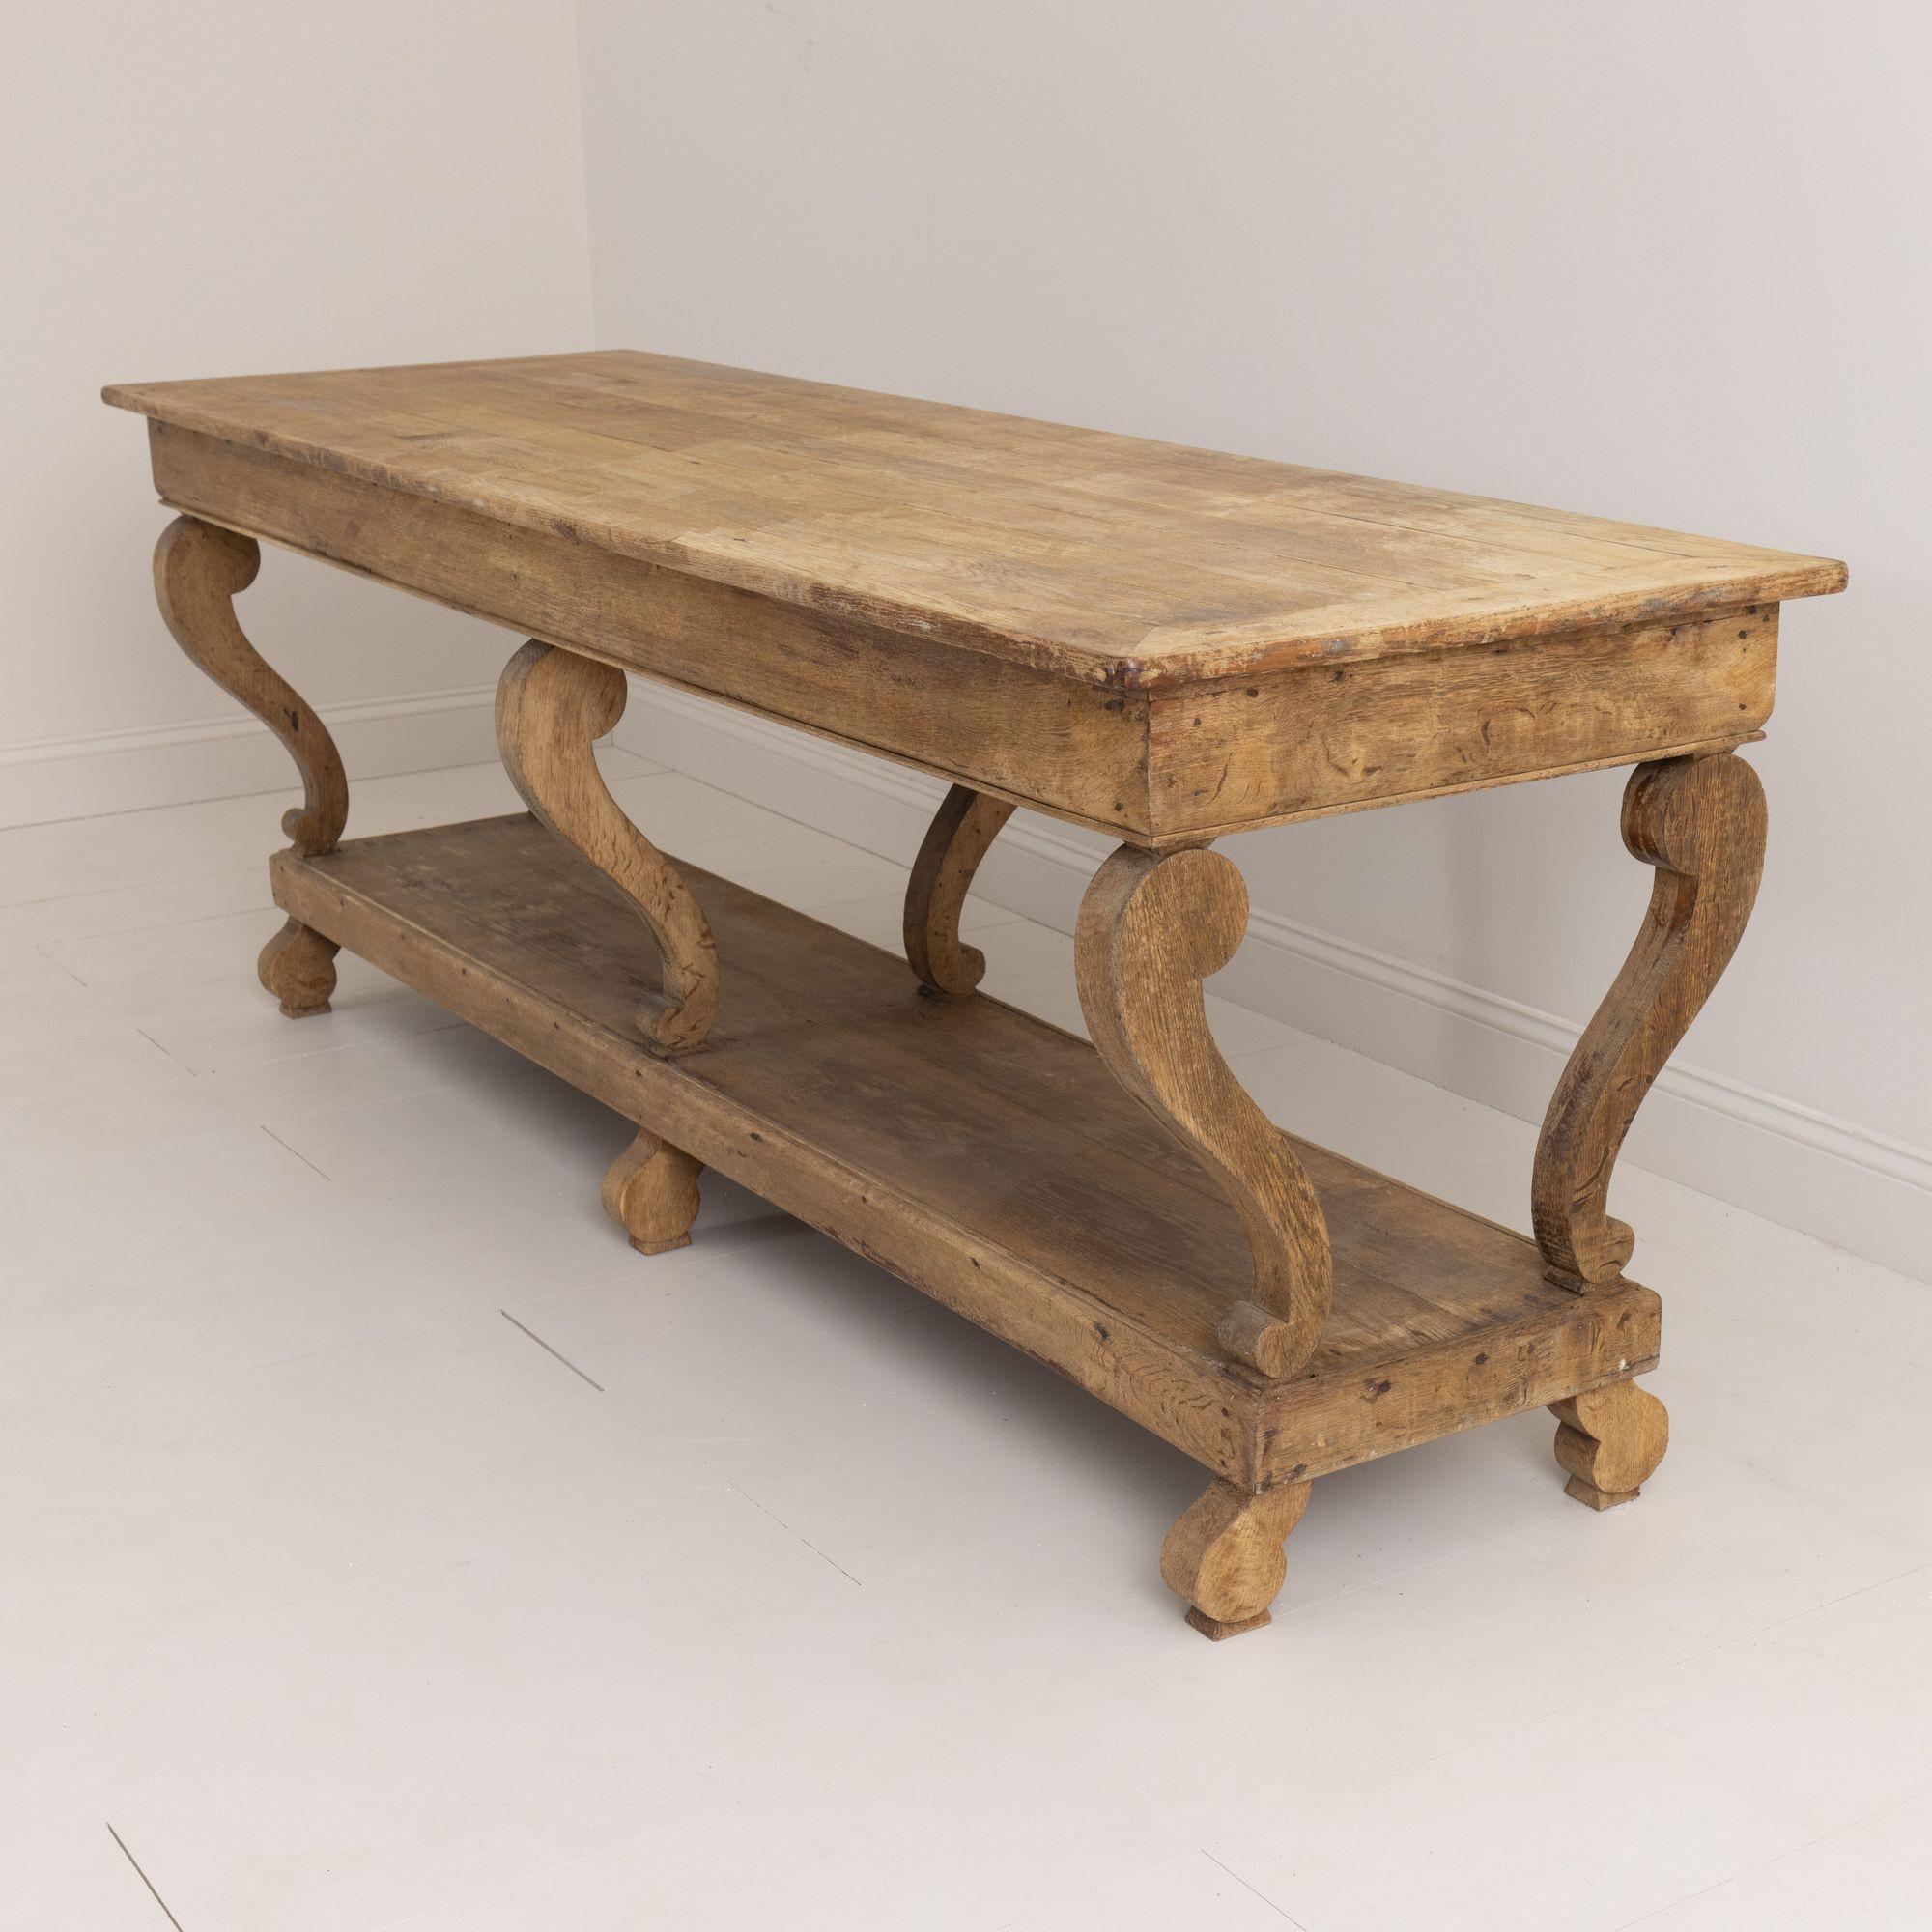 Hand-Carved 19th Century French Charles X Period Oak Draper's Table in Original Patina